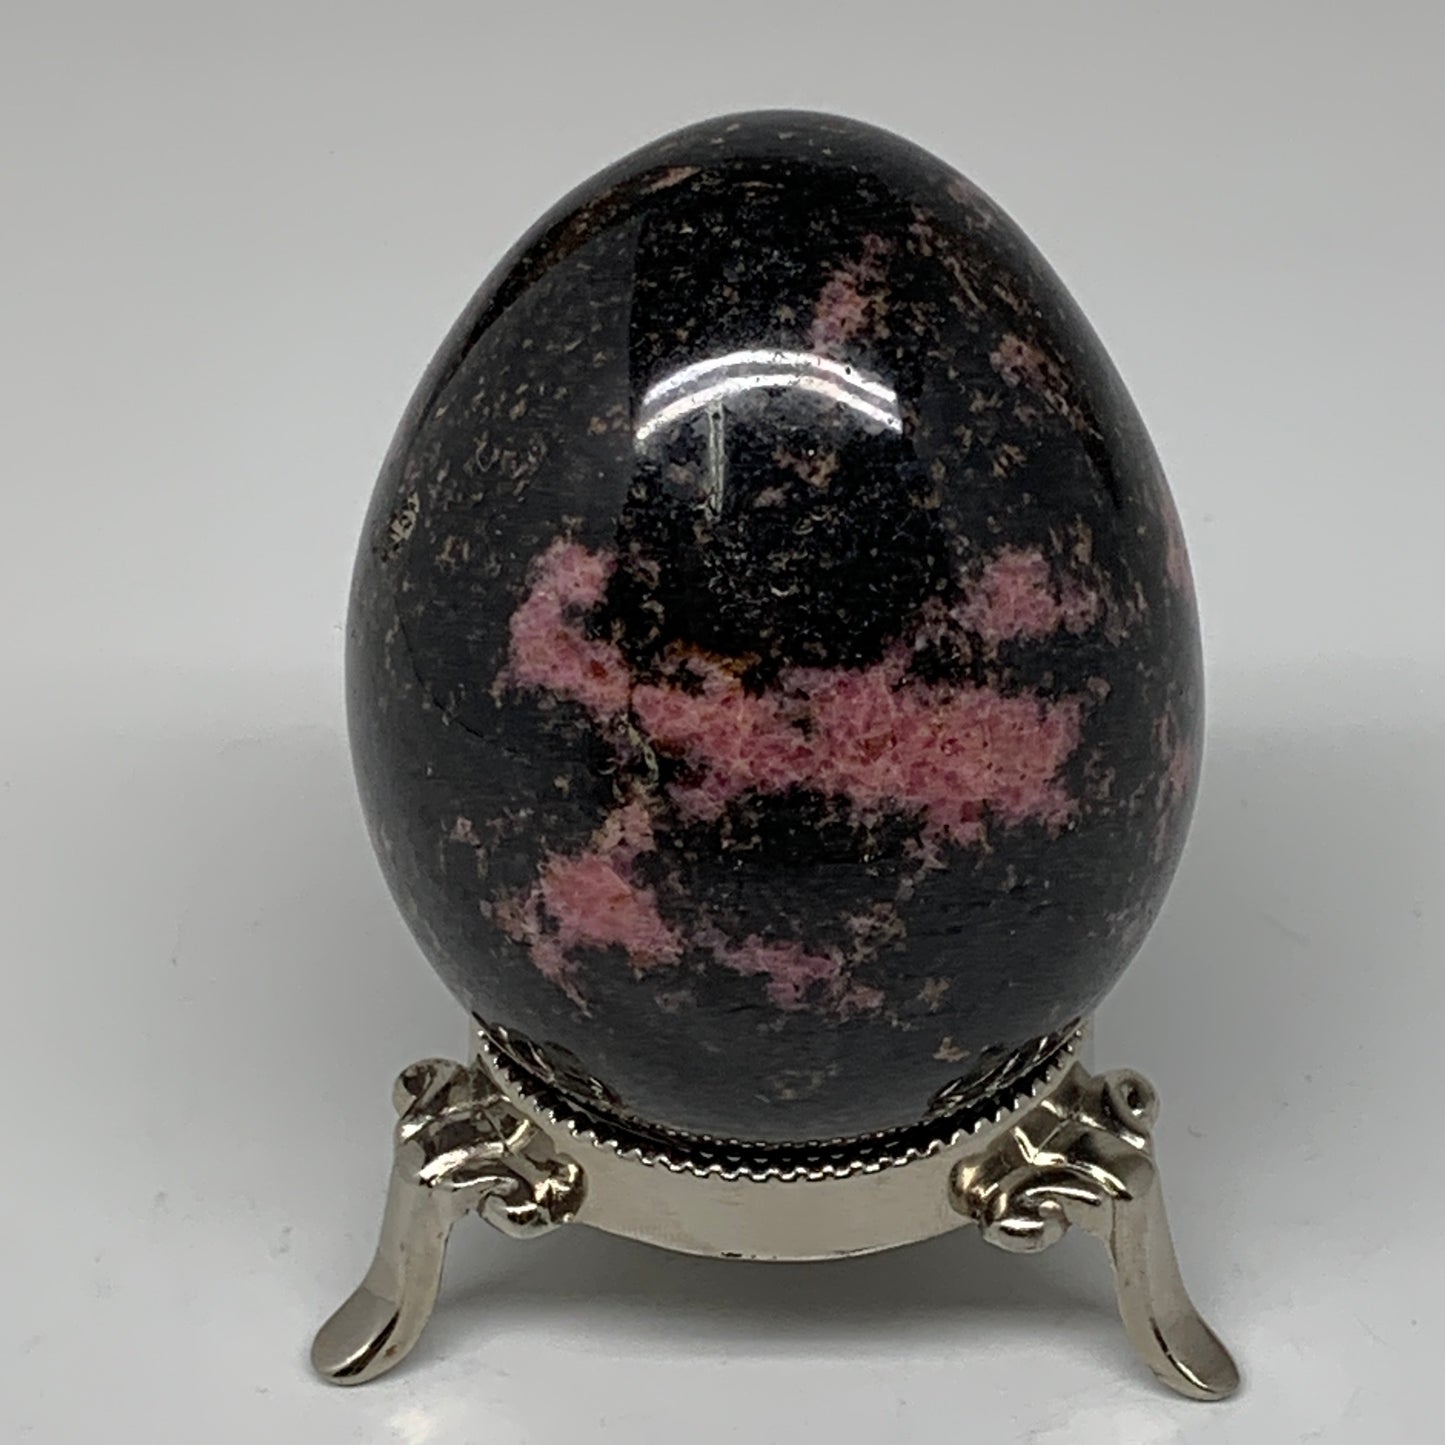 455.1g, 2.9"x2.3" Natural Untreated Rhodonite Egg from Madagascar, B4701